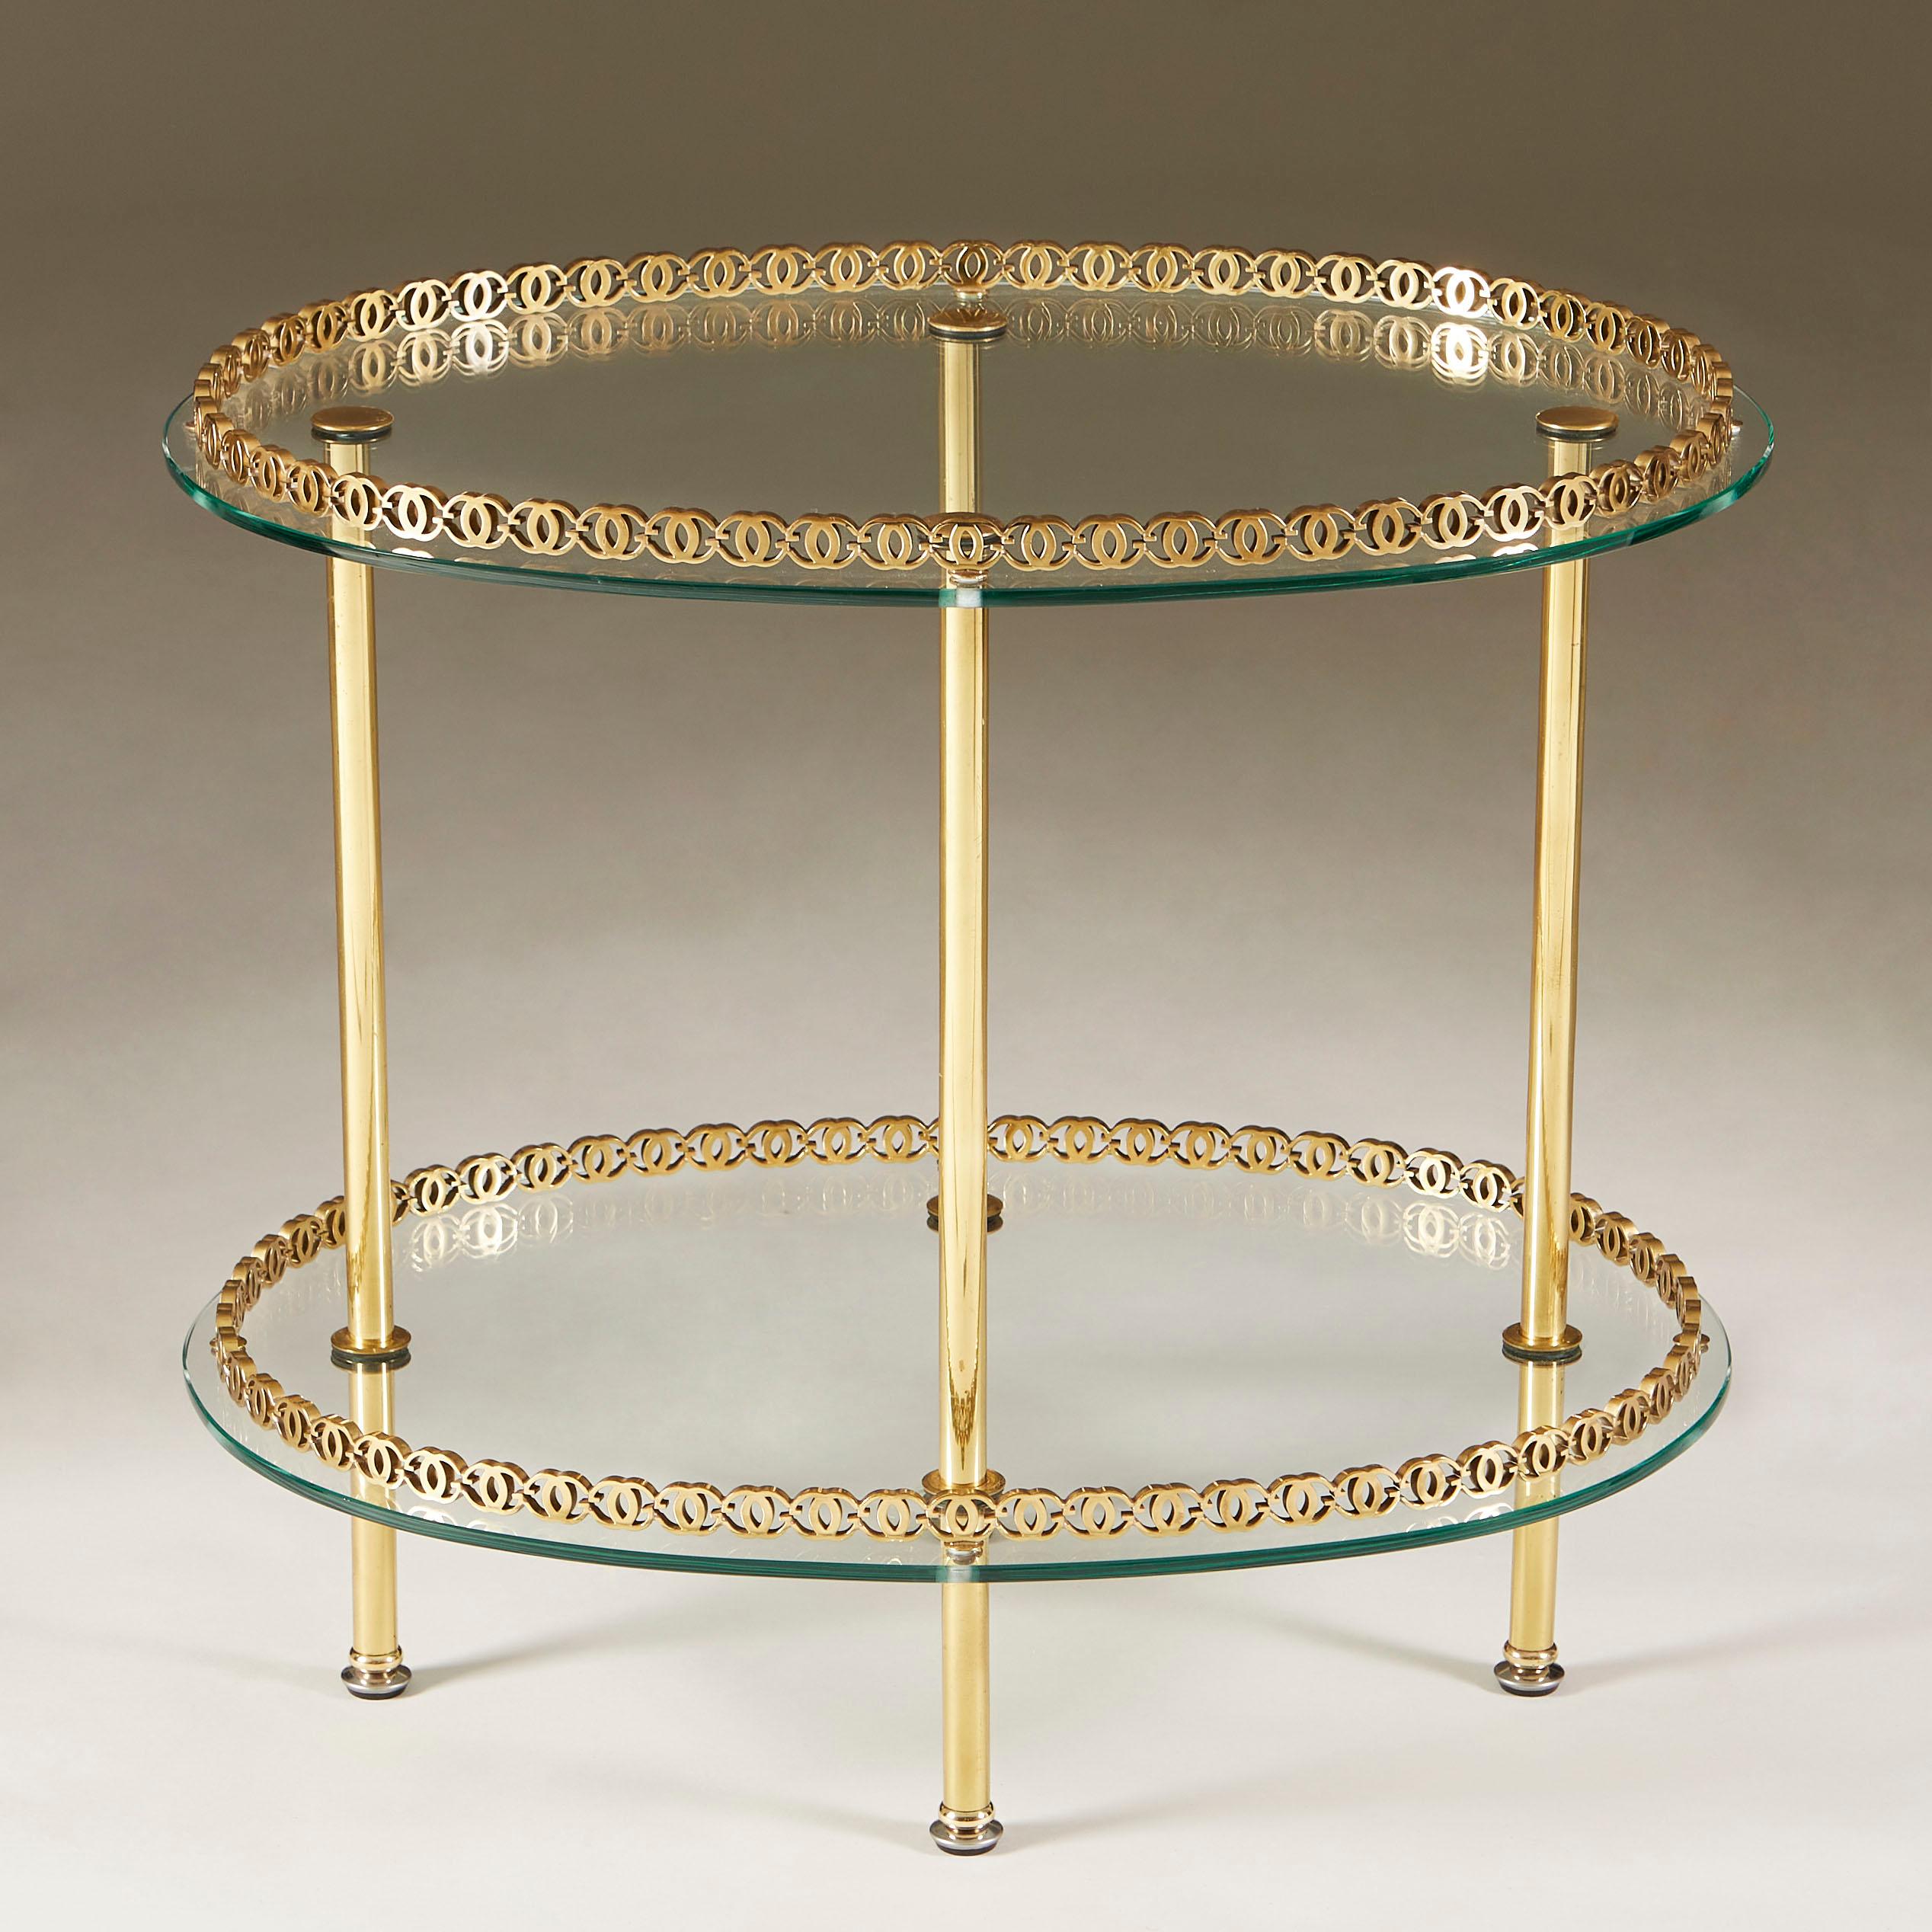 Elegant oval table with two highly decorative brass rods surrounding the glass shelves.